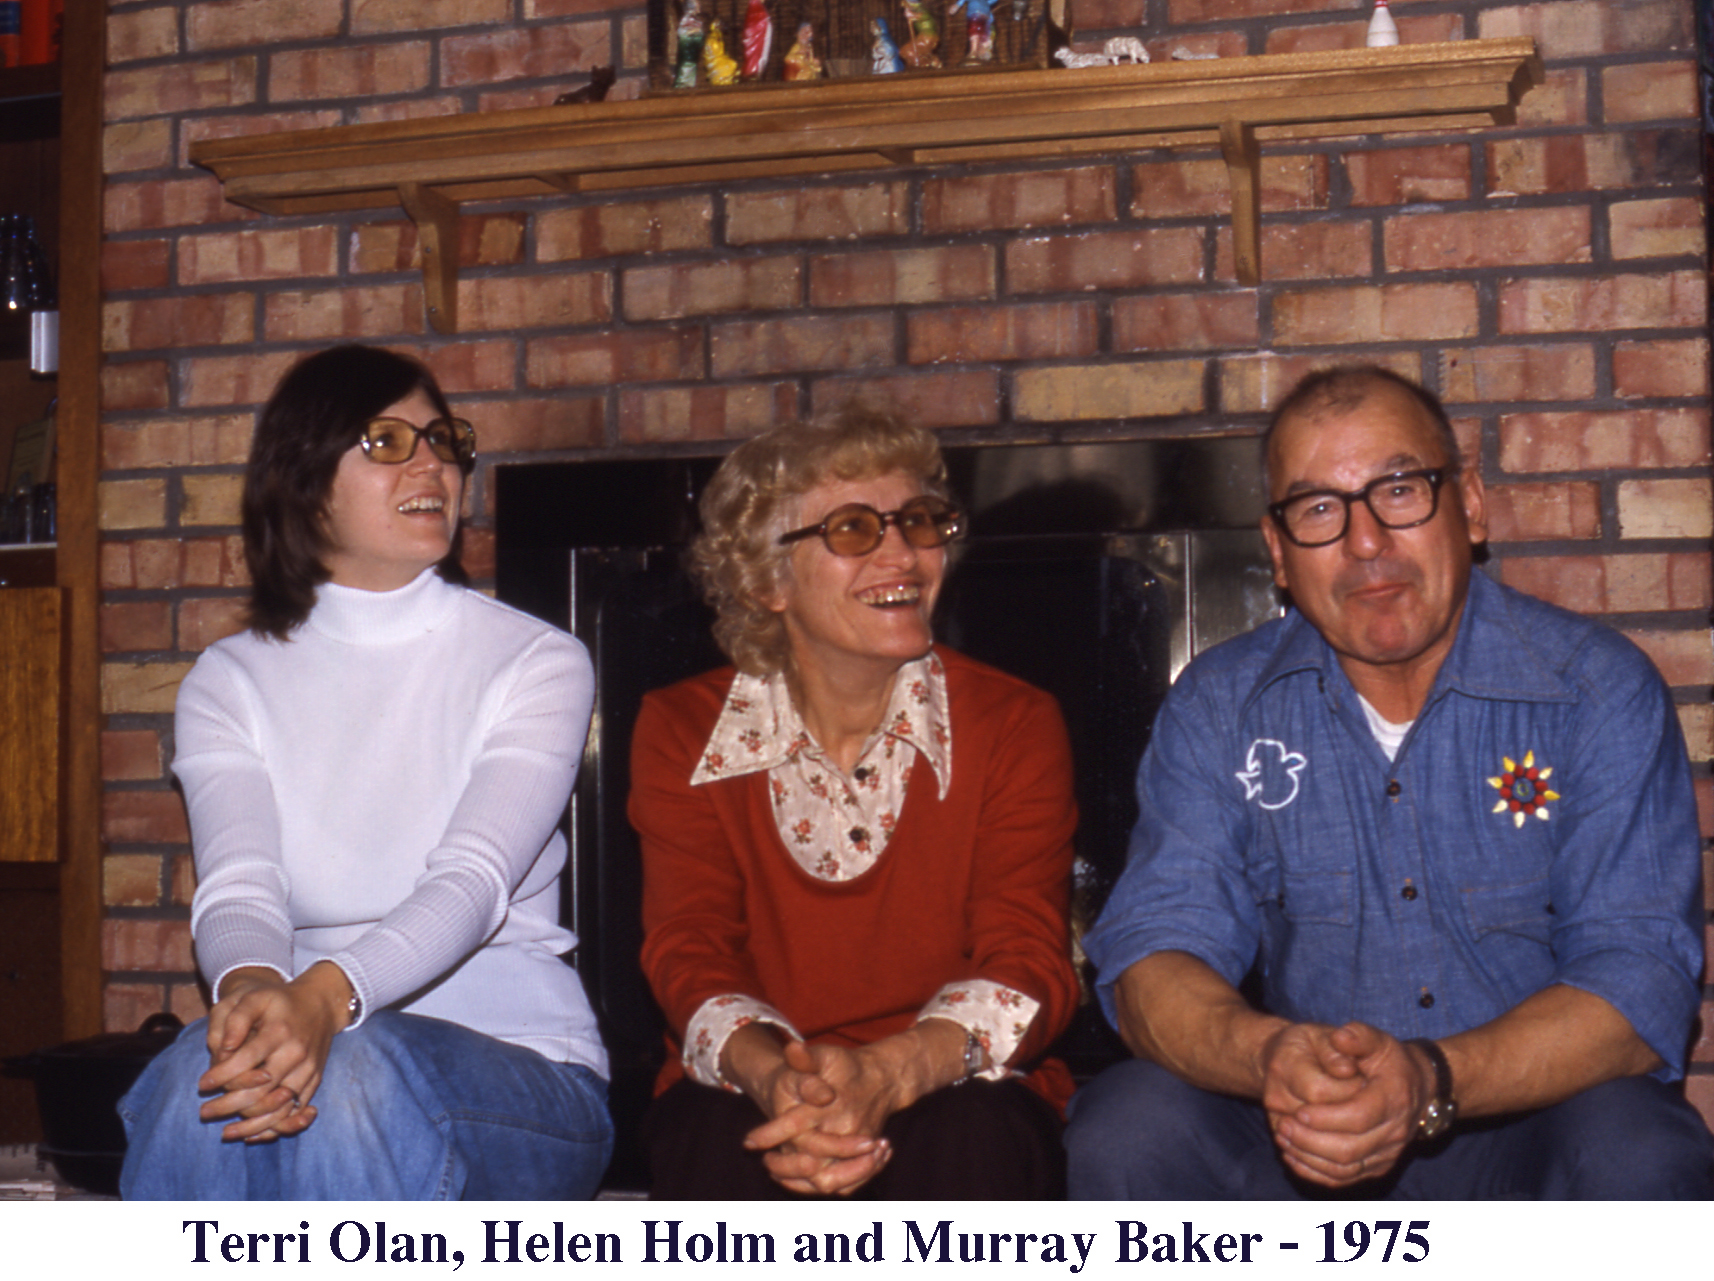 Terri Olan, Helen Holm and Murray Baker sitting in front of the 
      fireplace at Christmas 1975